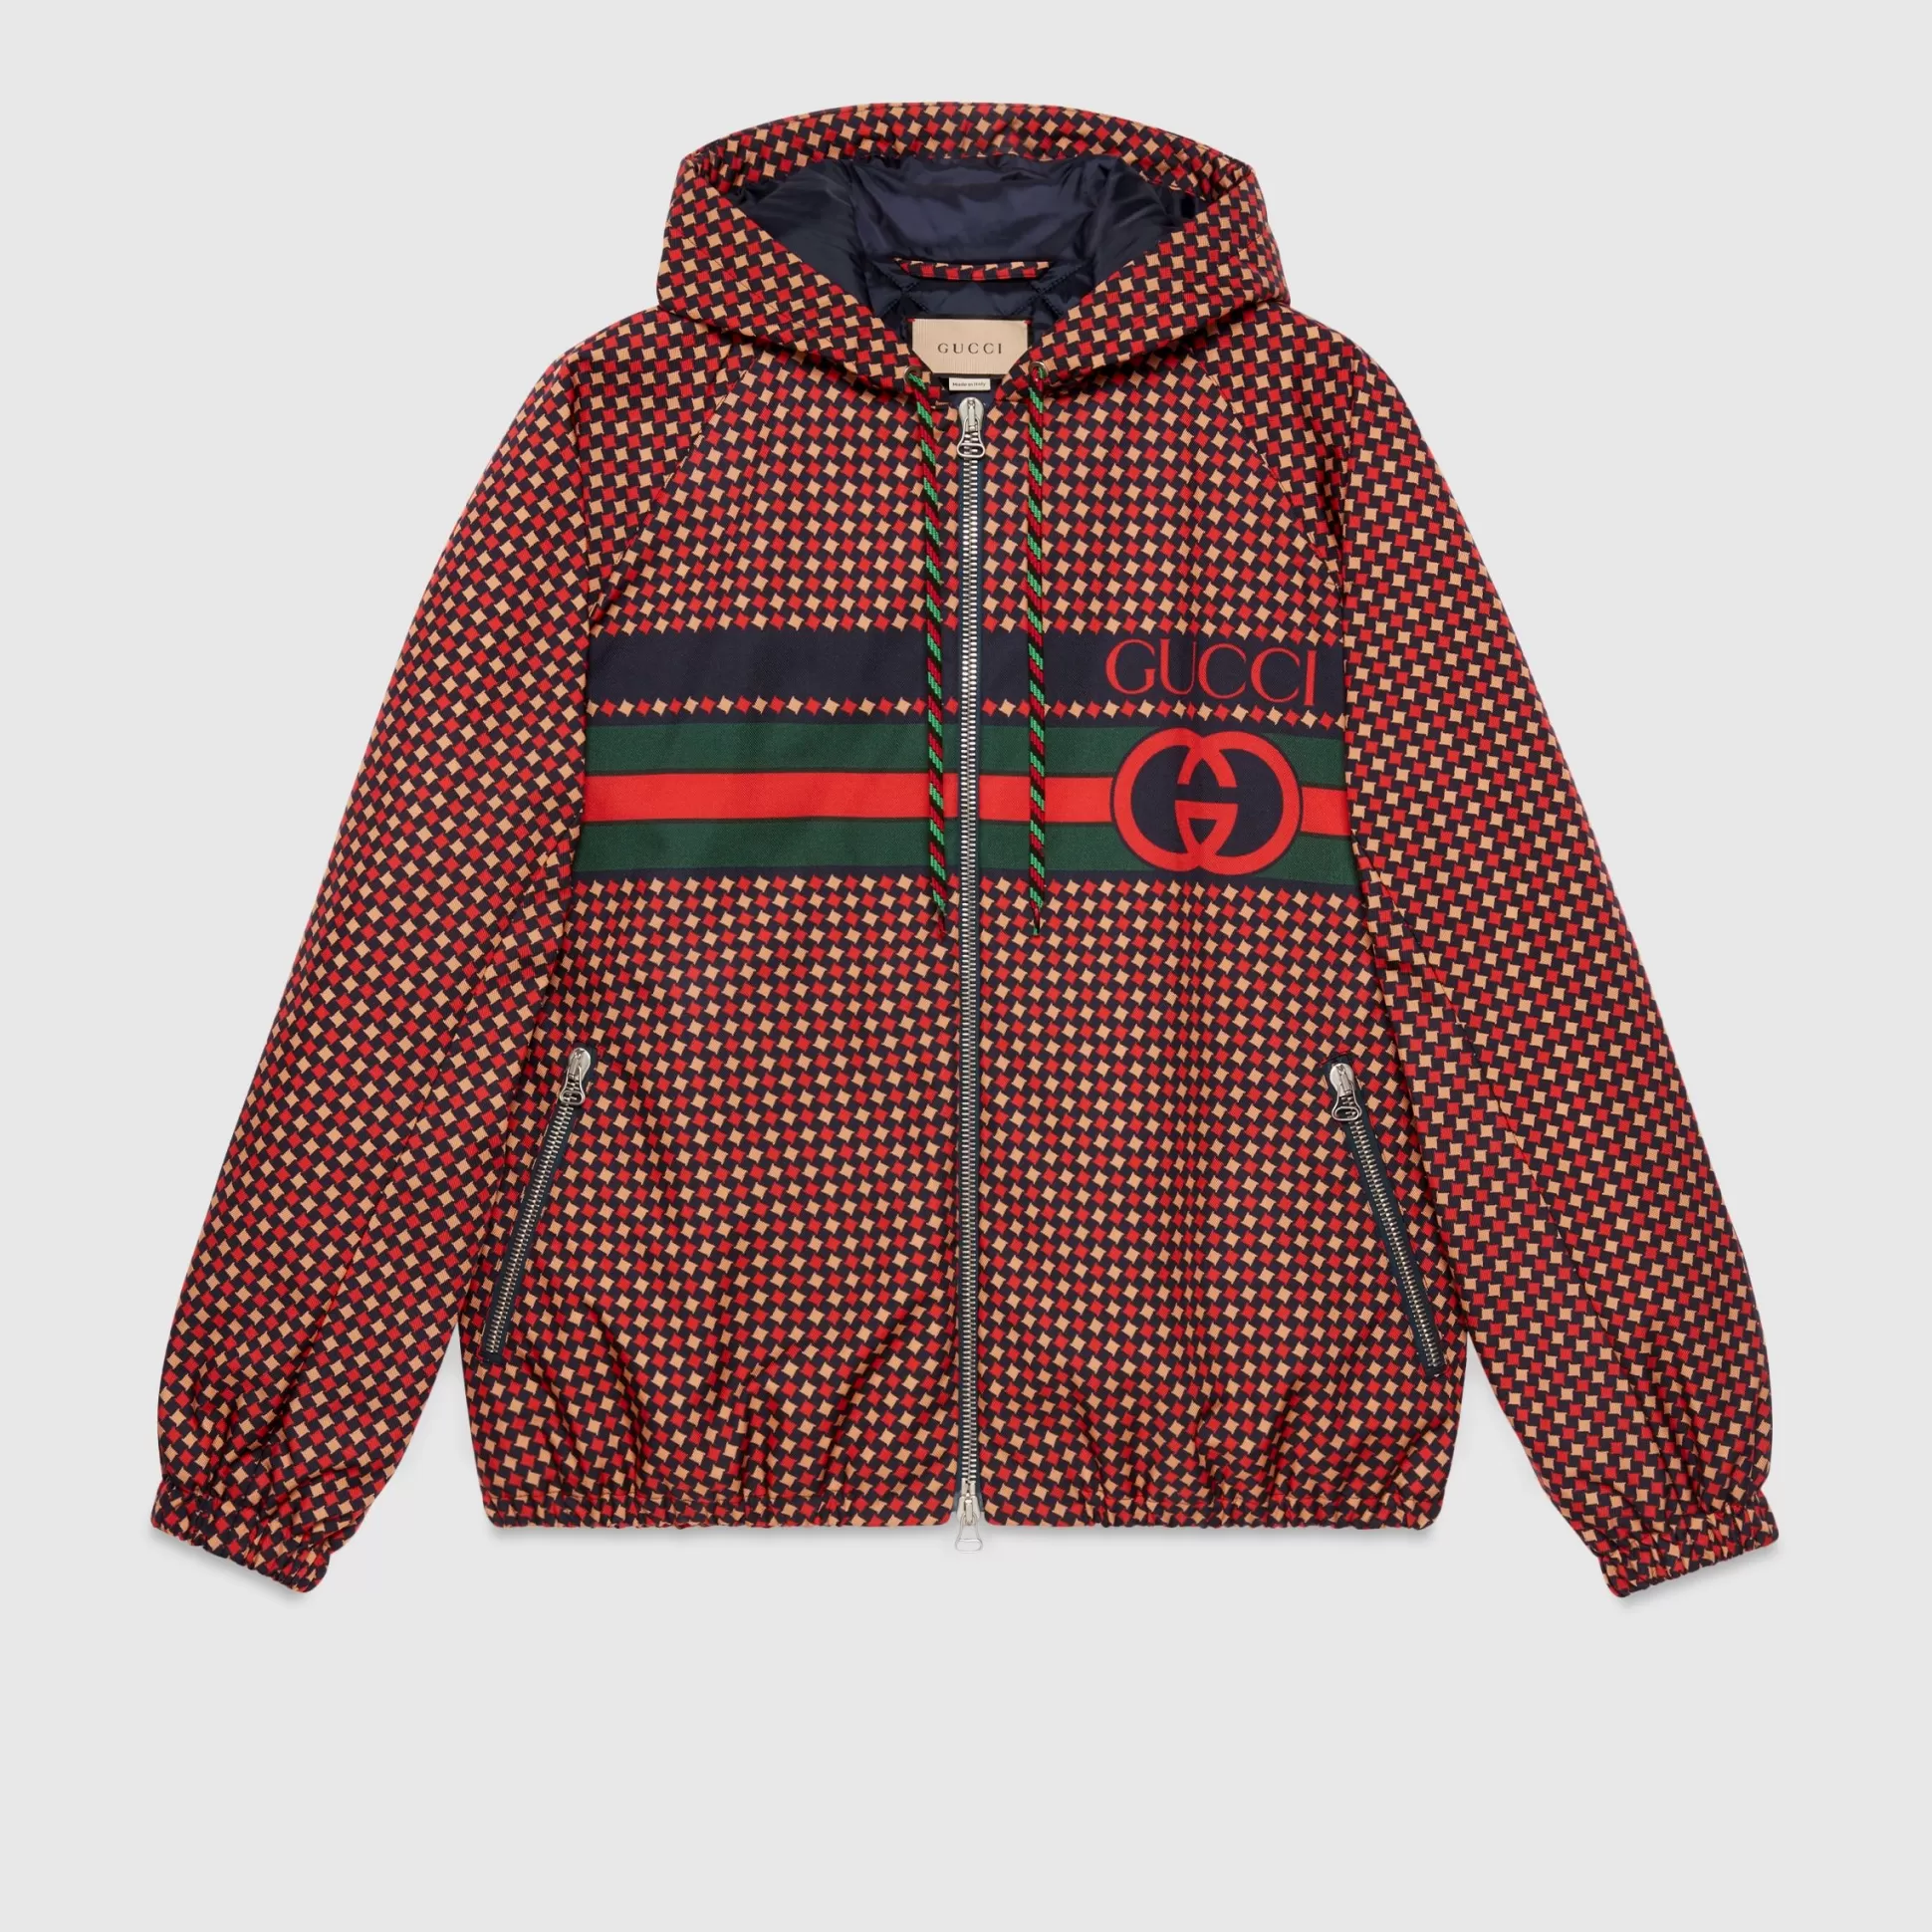 GUCCI Geometric Houndstooth Canvas Jacket-Men Outerwear